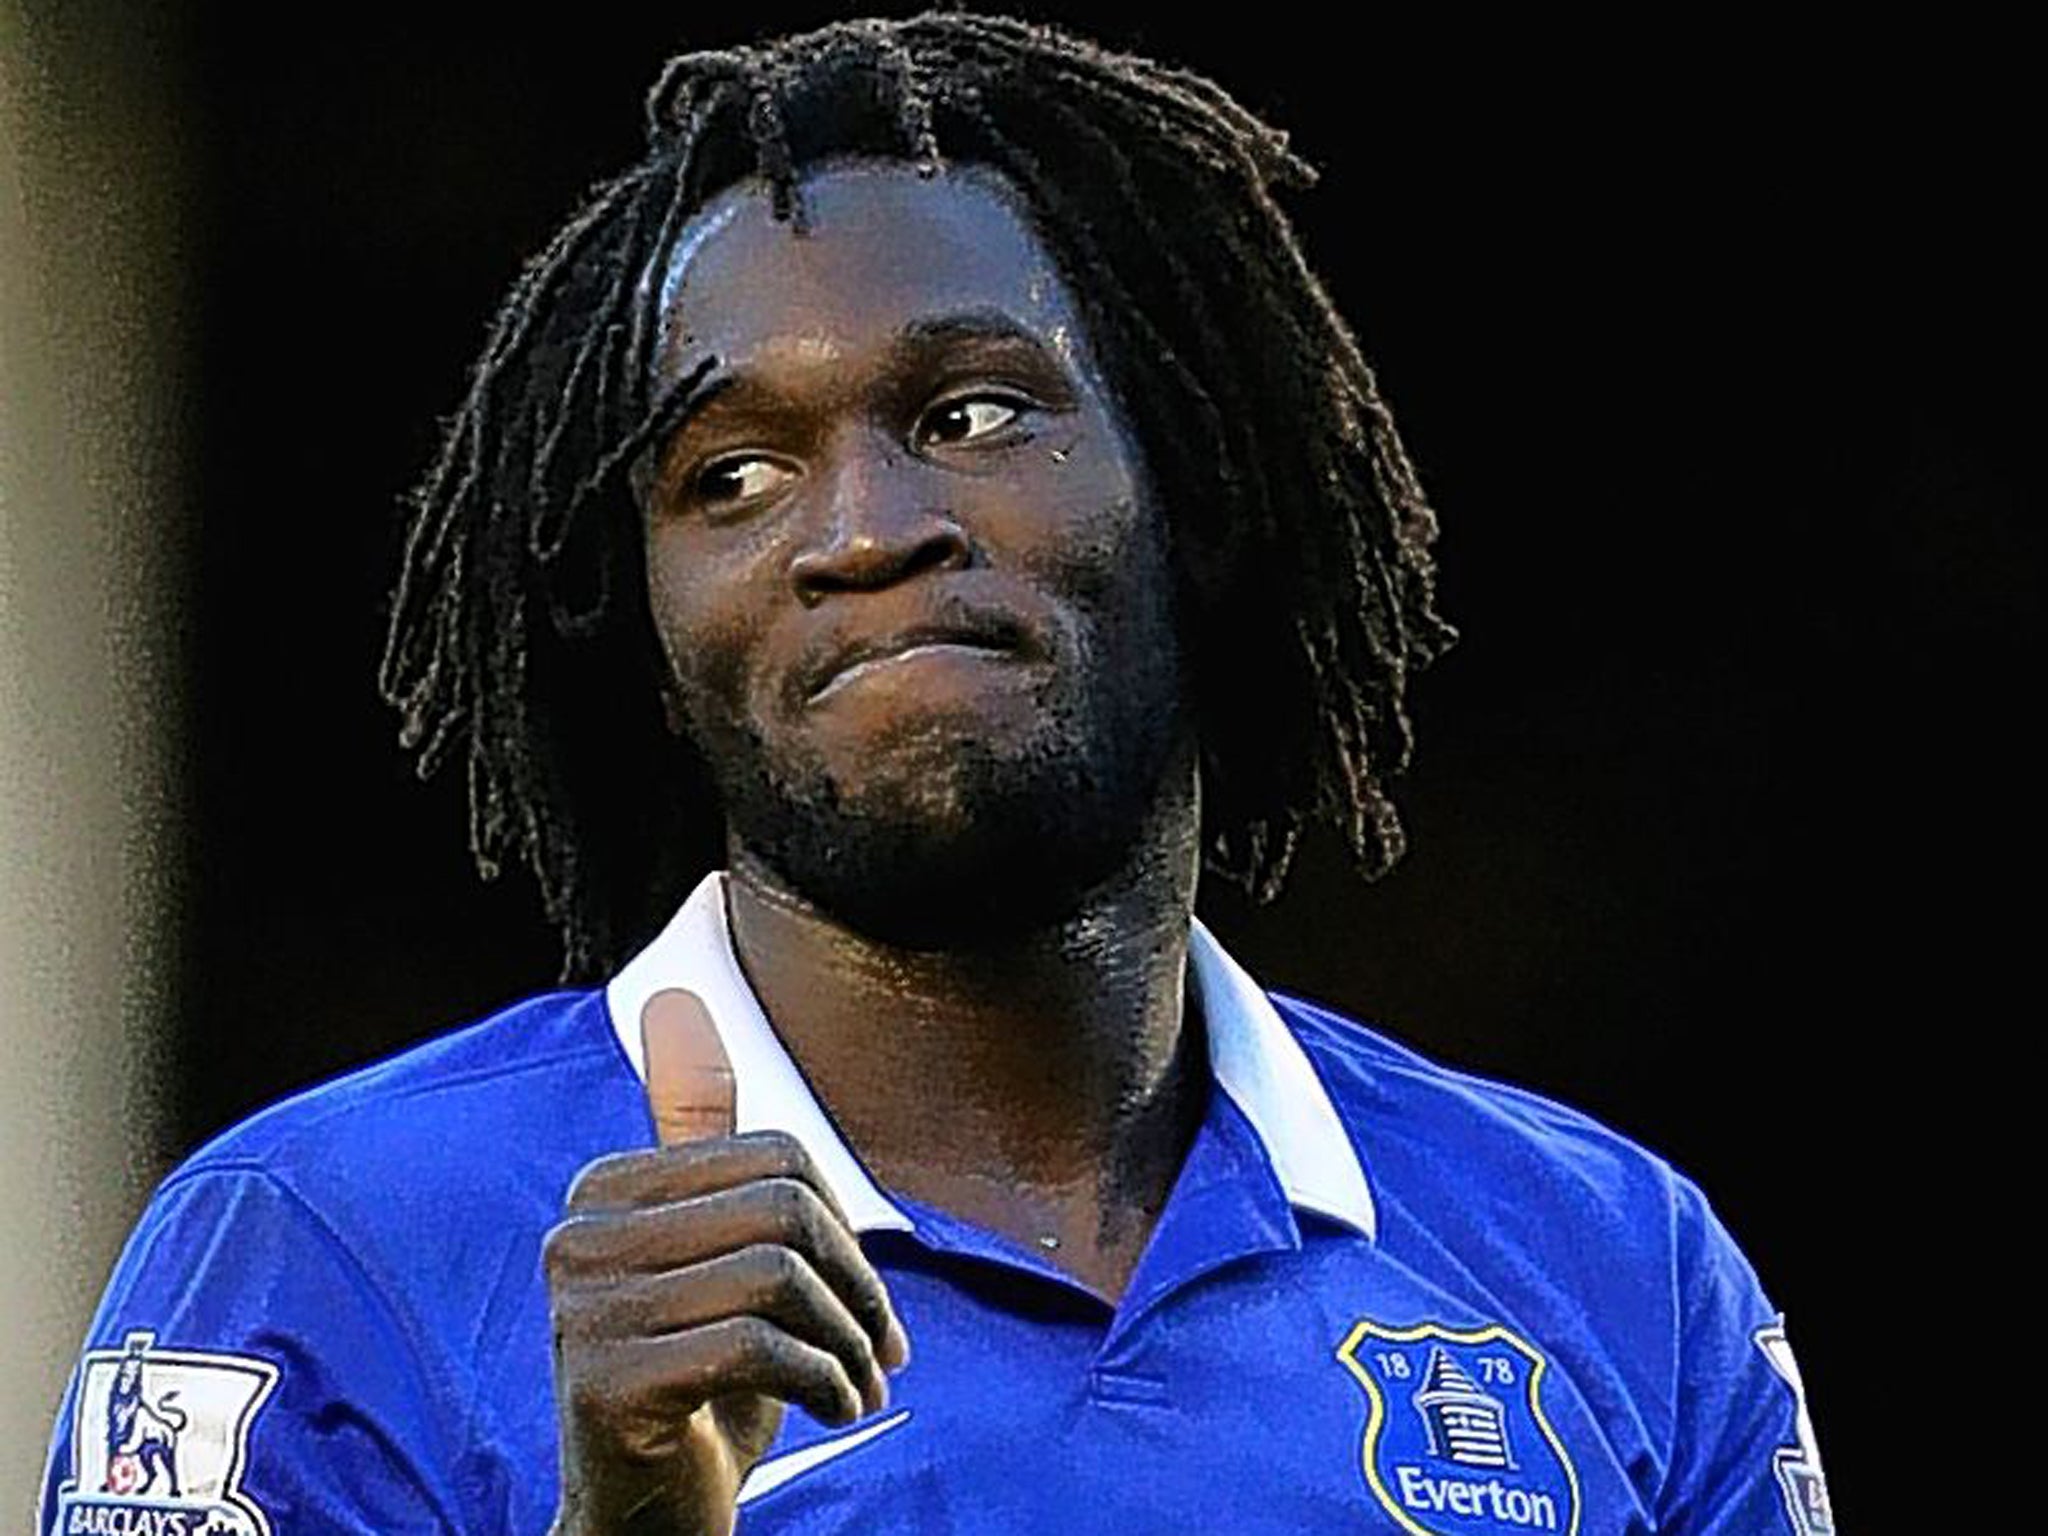 Stop the right to roam: Players like Romelu Lukaku must not be loaned to another Premier League side in tactical deals that benefit the parent clubs